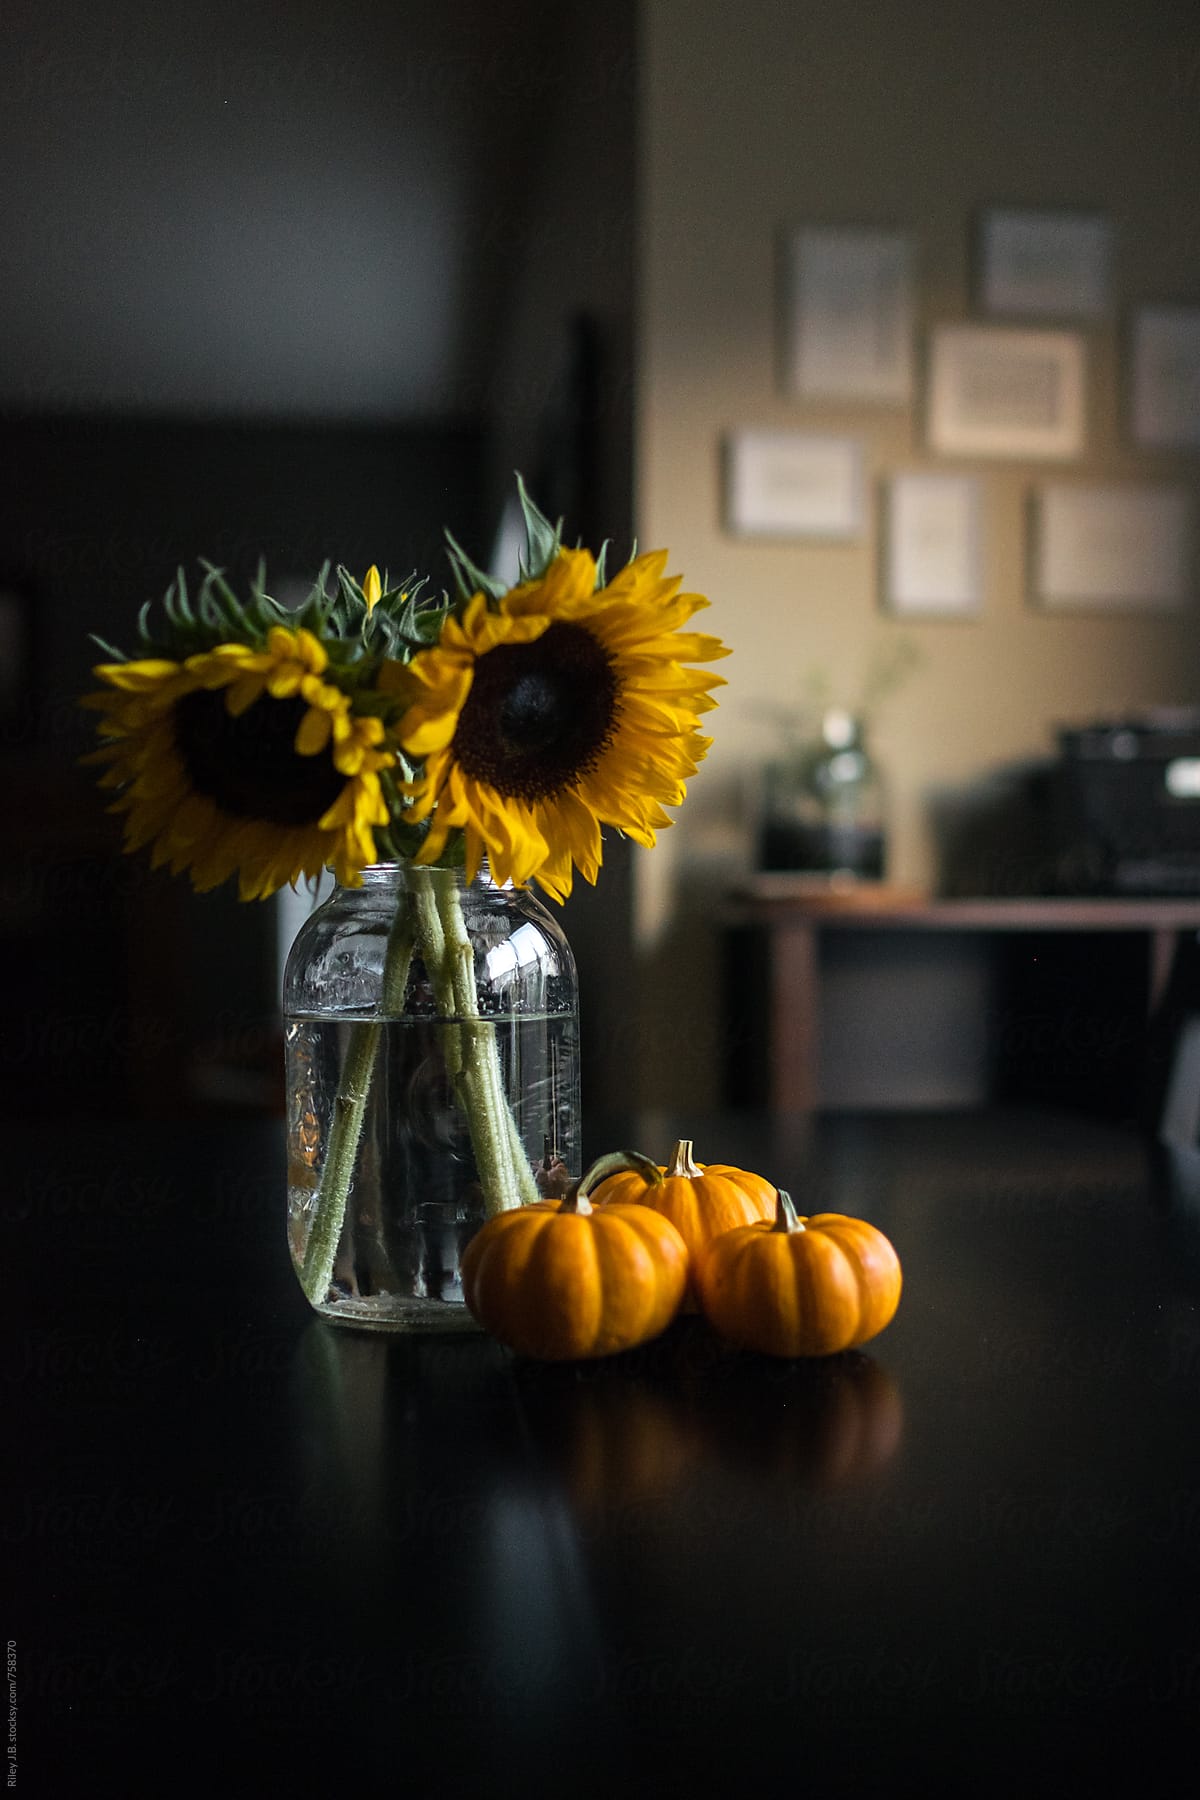 Small pumpkins sit next to a mason jar with sunflowers.